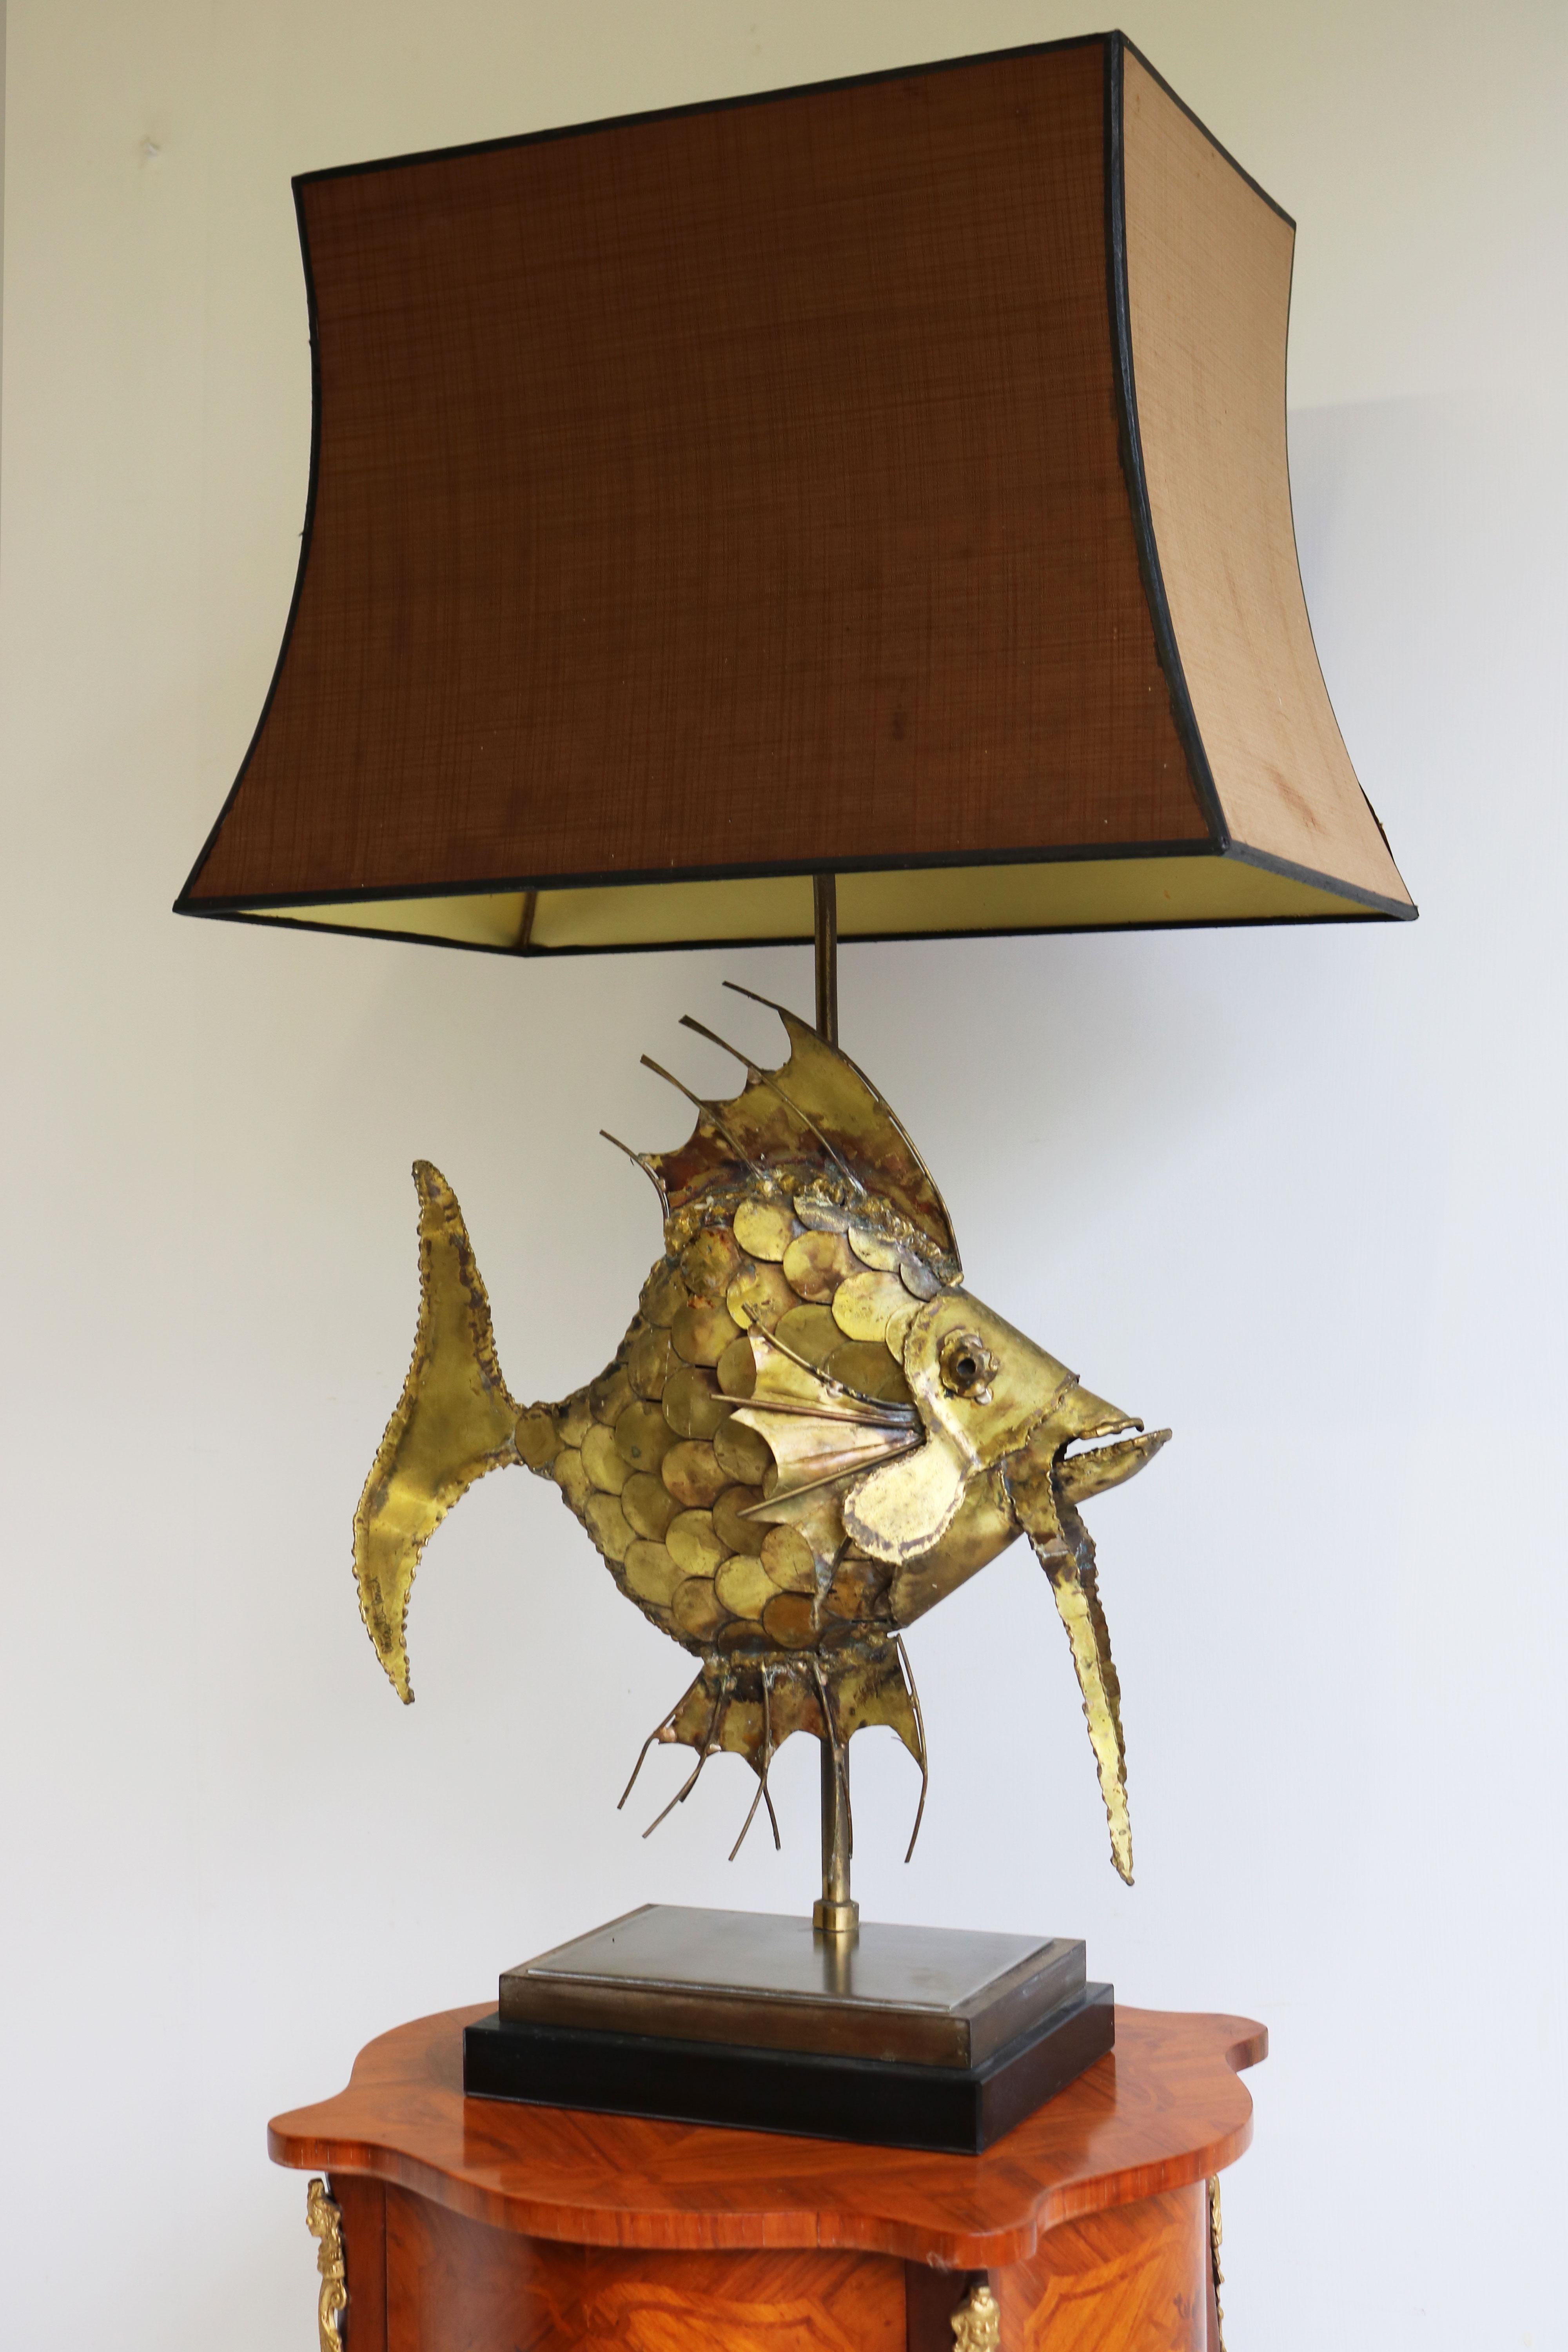 Late 20th Century Design Brutalist Table Lamp in Brass by Daniel d'haeseleer 1970 Fish Sculpture For Sale